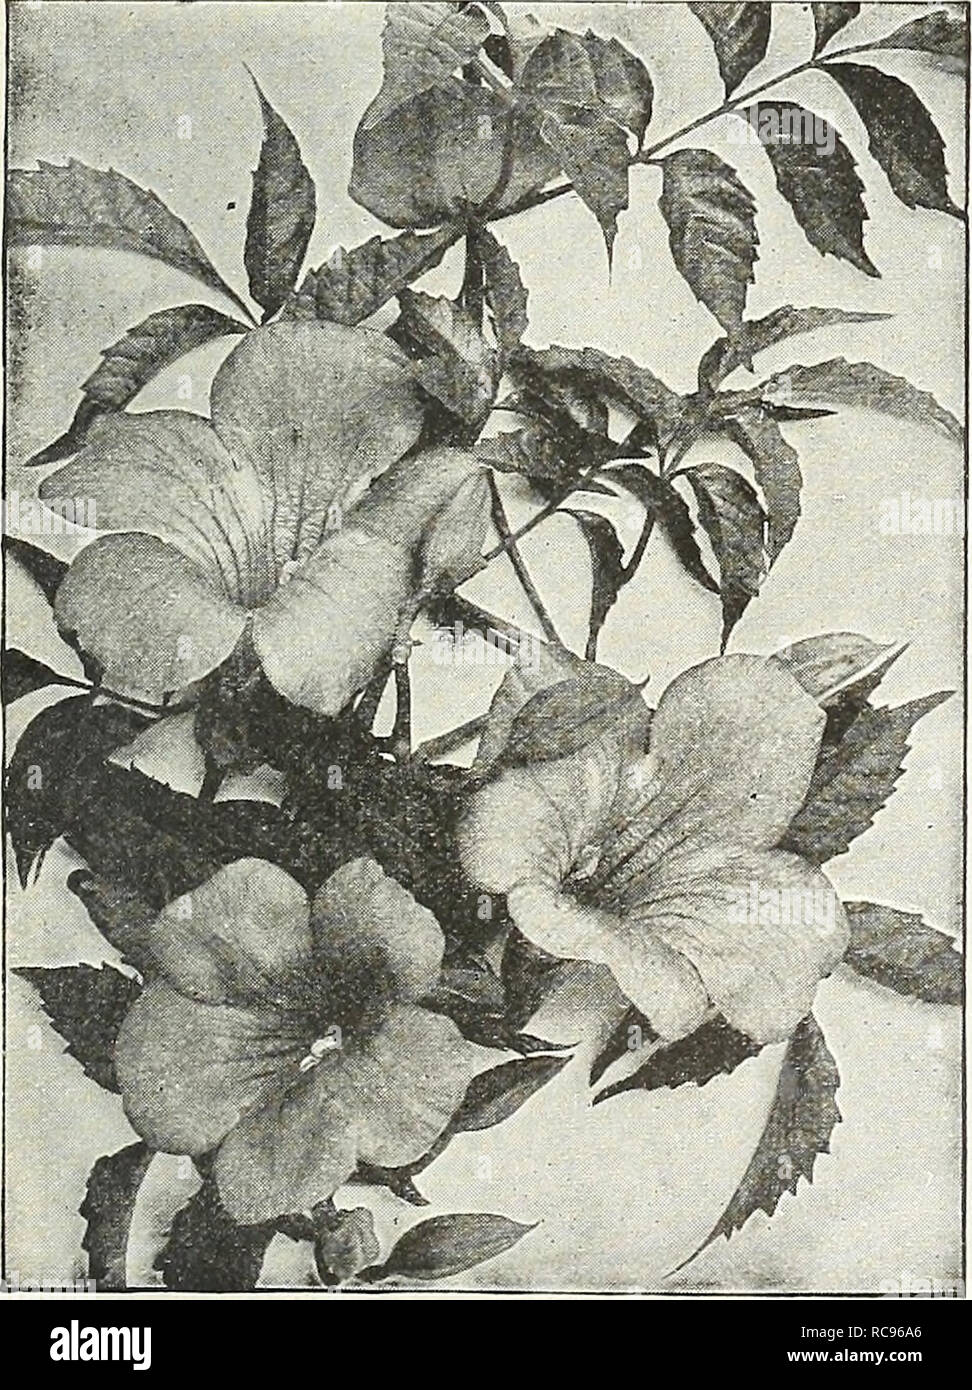 . Dreer's garden book 1926. Seeds Catalogs; Nursery stock Catalogs; Gardening Equipment and supplies Catalogs; Flowers Seeds Catalogs; Vegetables Seeds Catalogs; Fruit Seeds Catalogs. BiGNONiA, OR Trumpet Vine Ampelopsis Veitchi Quinquefolia (Virginia Creeper or American Ivy). This well known climber is one of the best and quickest growing varieties for covering trees, trellises, arbors, etc.; its large, deep green foliage assumes brilliant shades of yellow, crimson and scarlet in the fall. Strong plants, 40 cts. each; $4.00 per doz.; $25.00 per 100. Veitchi (Boston or Japan Ivy). The most pop Stock Photo